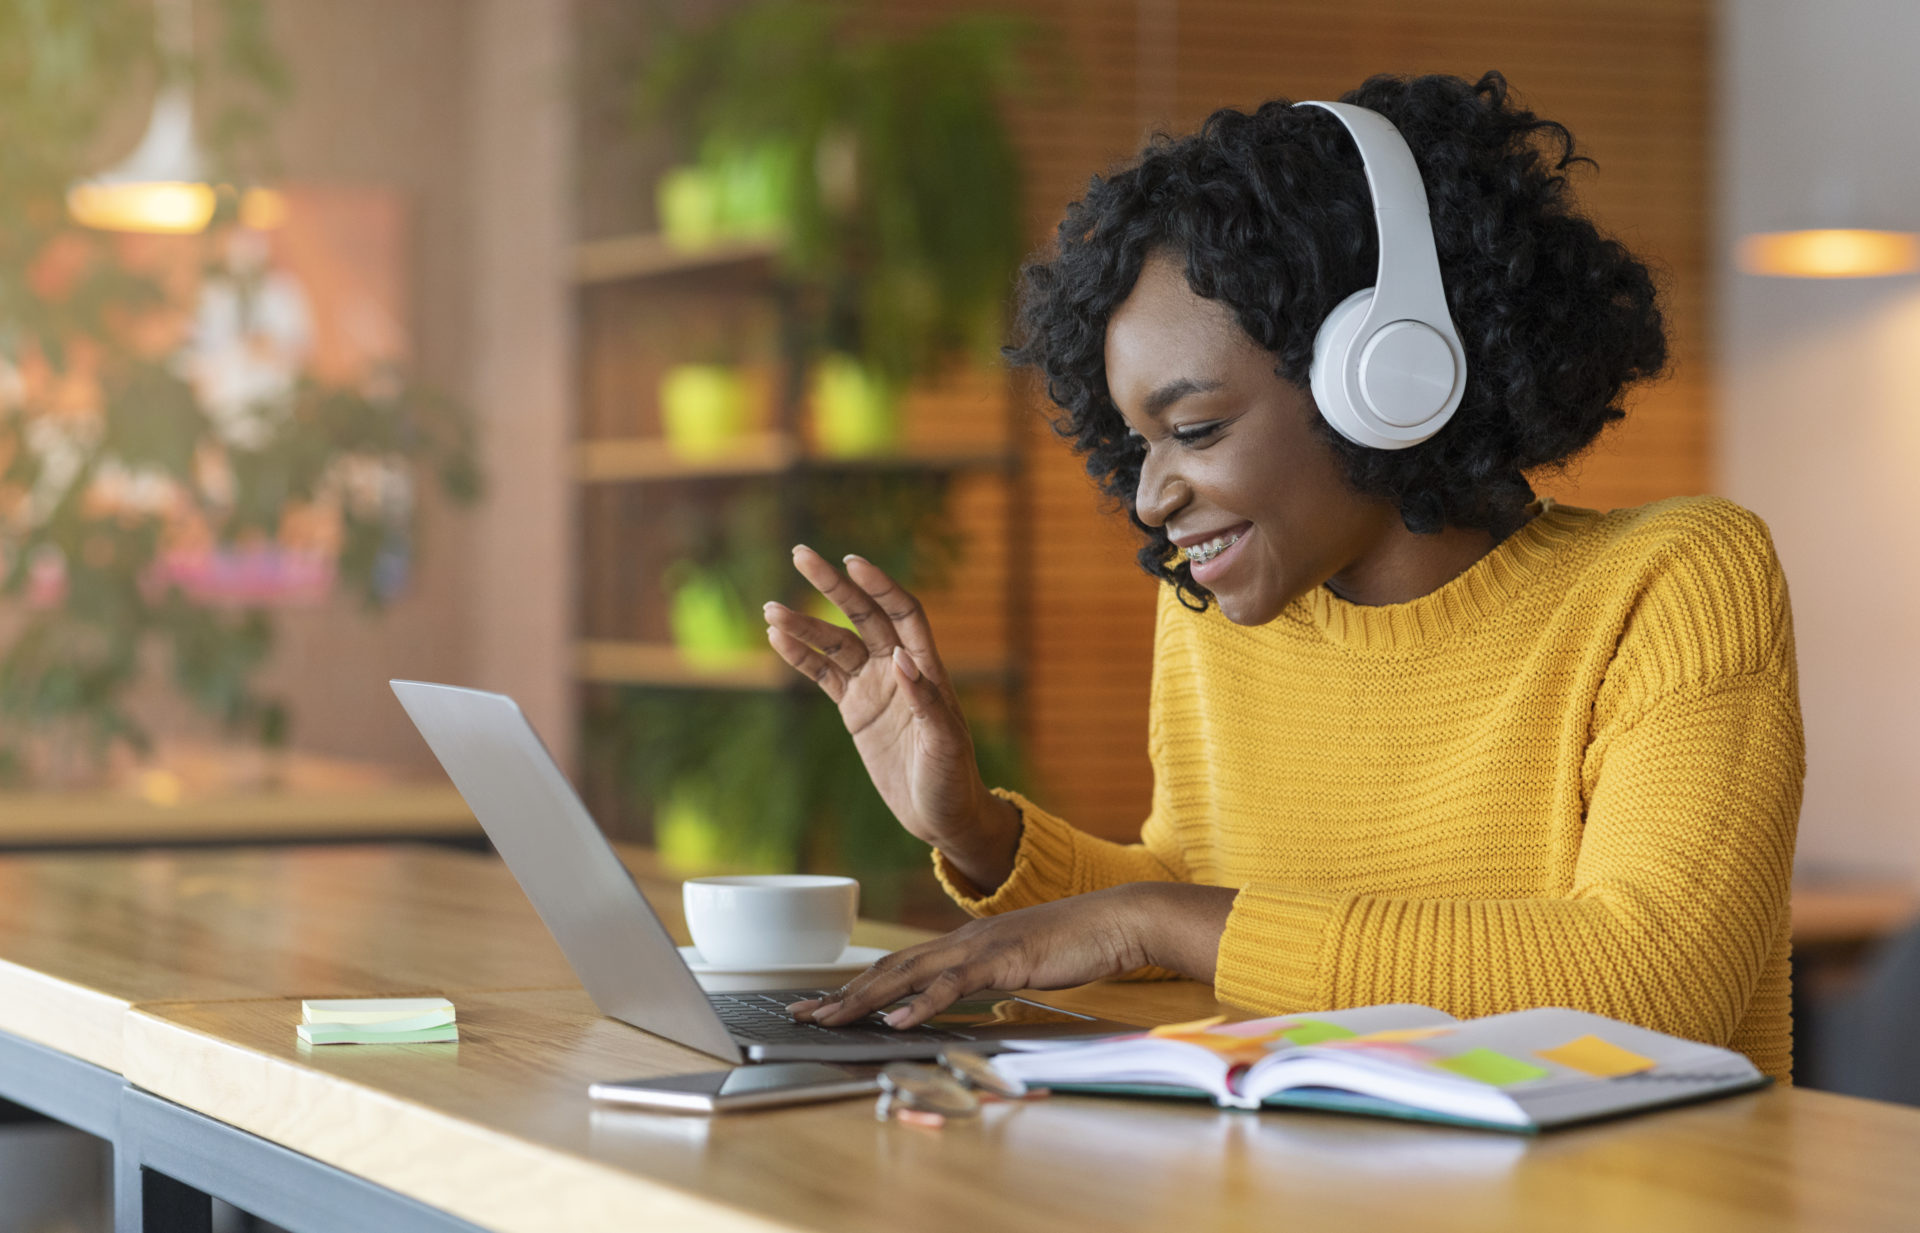 Female professional wearing headphones and on a video call through her laptop